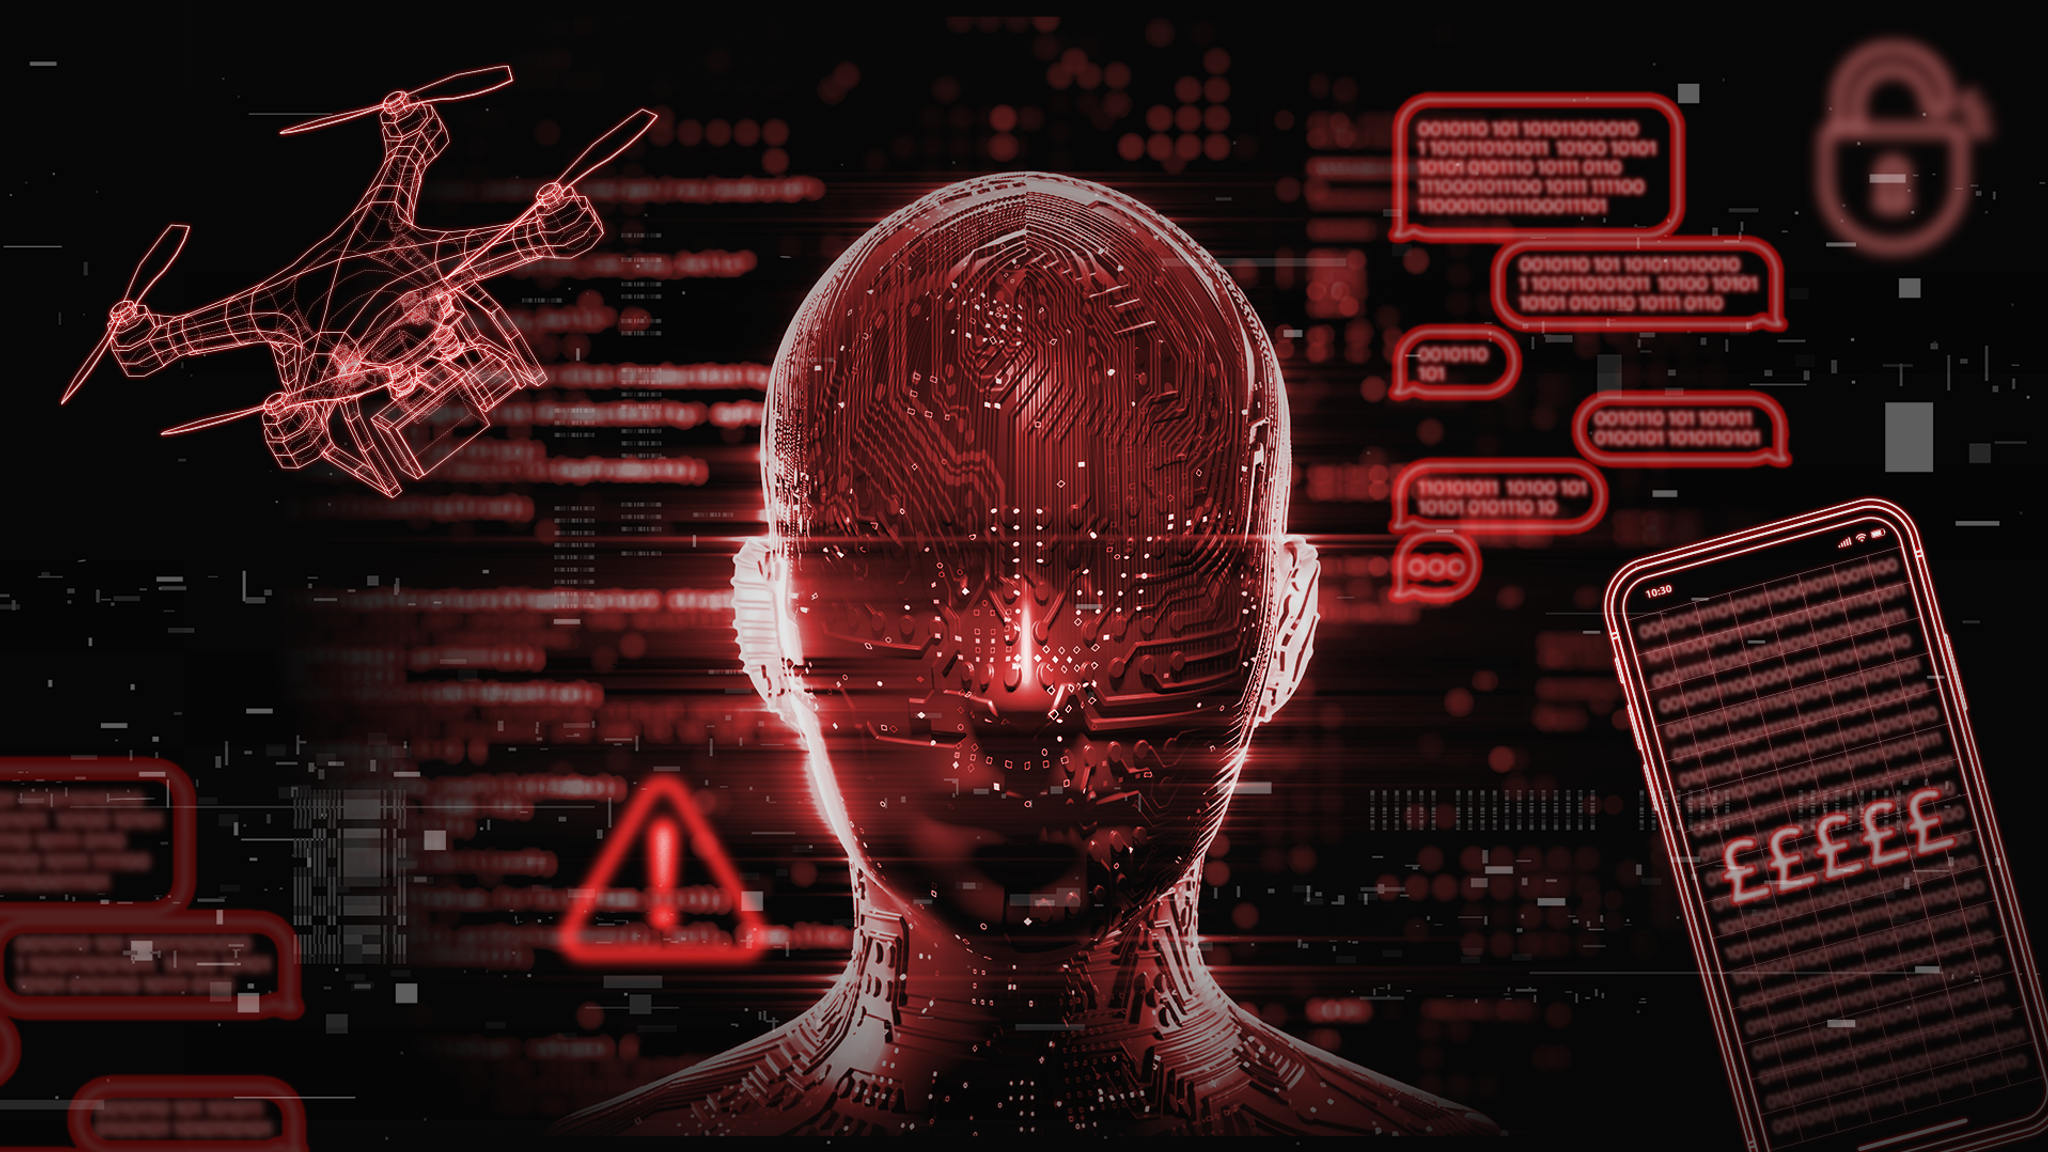 5 ways cybercriminals are weaponising artificial intelligence - Macbeth